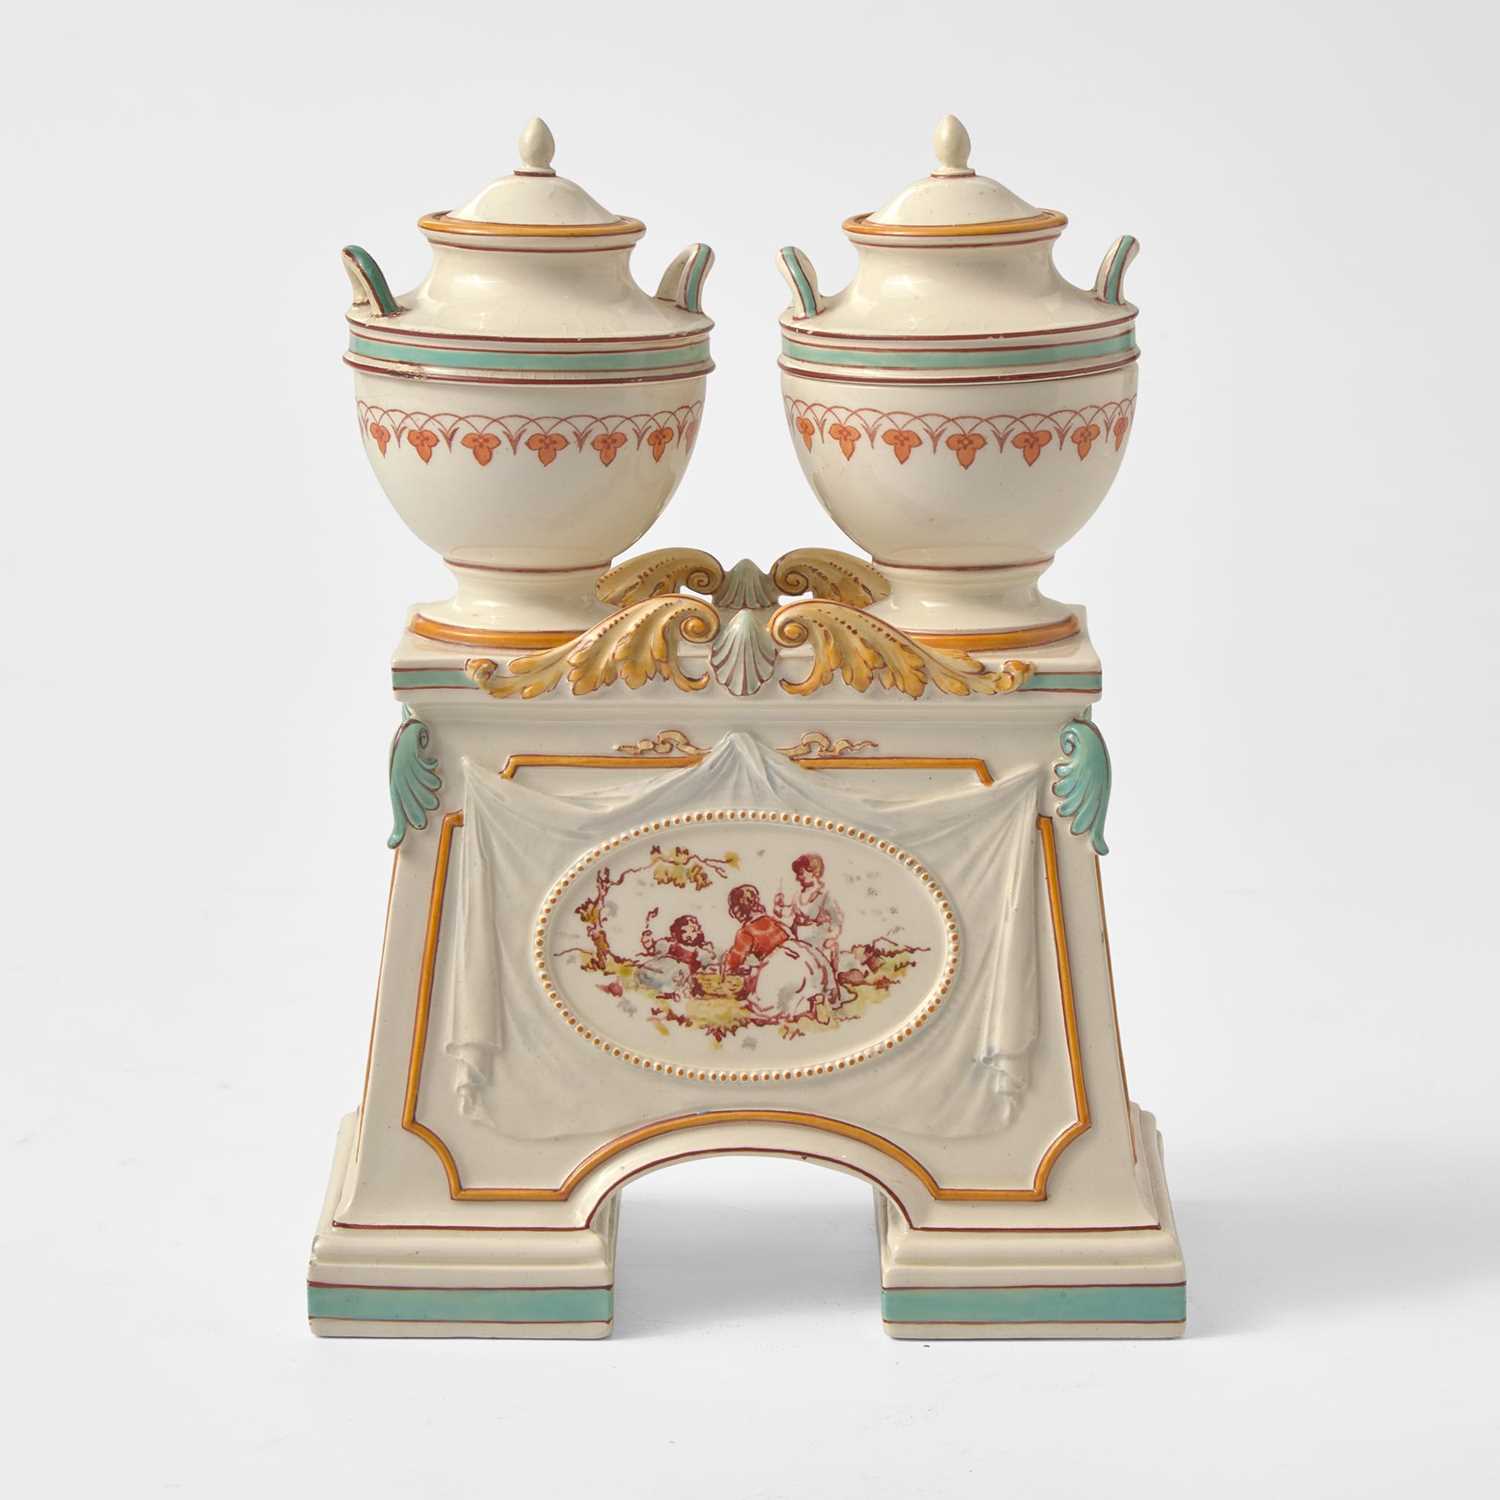 Lot 120 - A Wedgwood Emile Lessore (1805-1876) Decorated Queensware Double Urn Form Inkwell